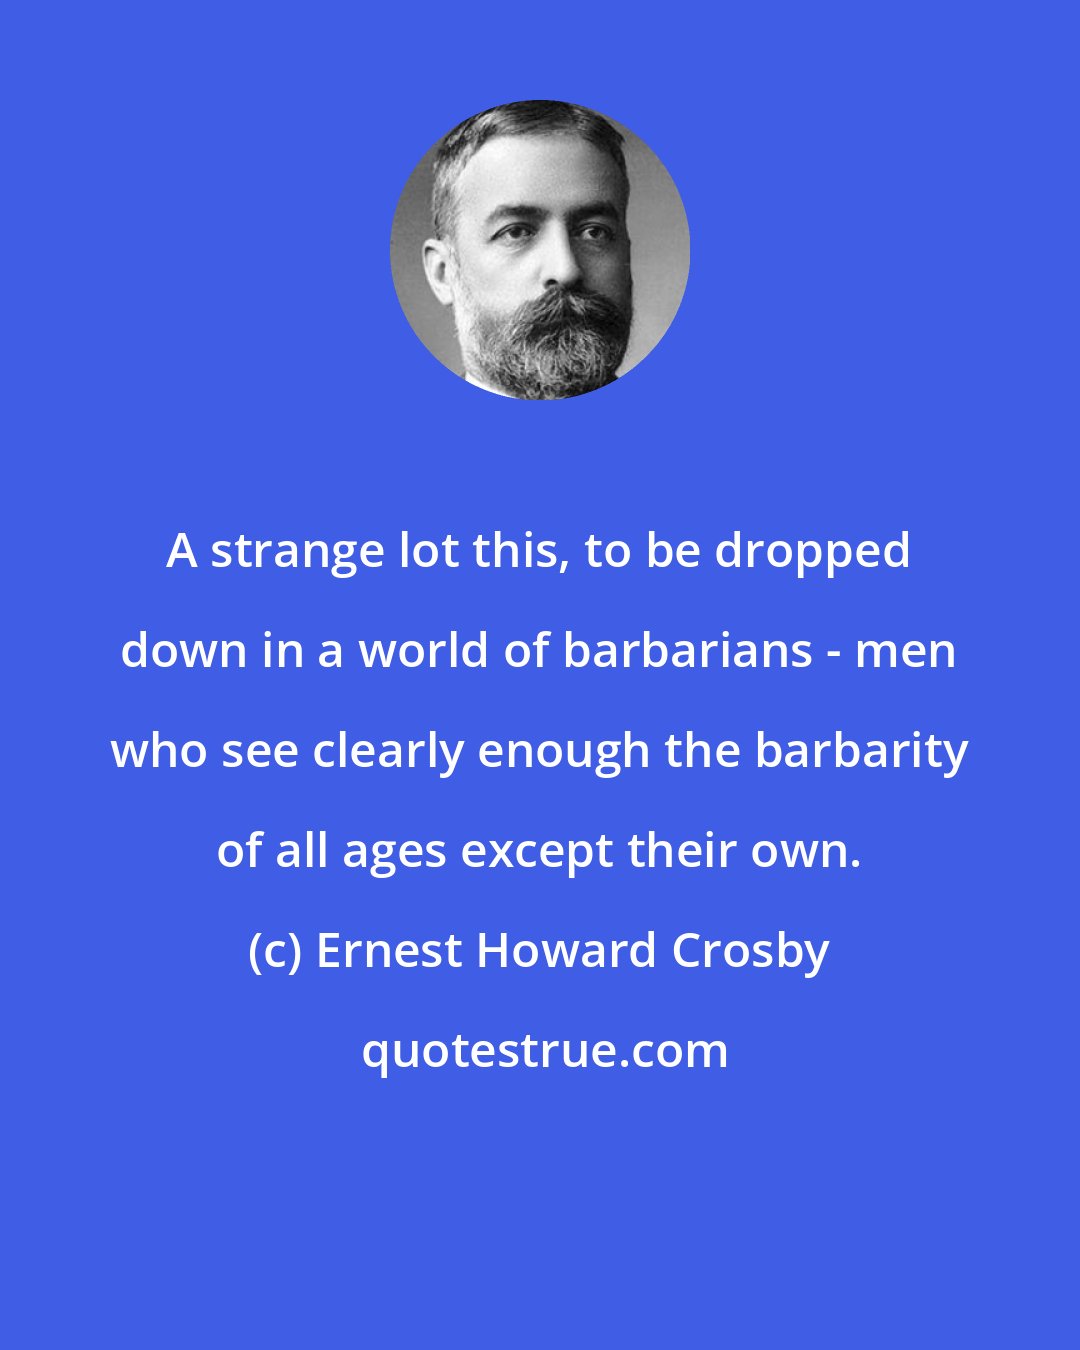 Ernest Howard Crosby: A strange lot this, to be dropped down in a world of barbarians - men who see clearly enough the barbarity of all ages except their own.